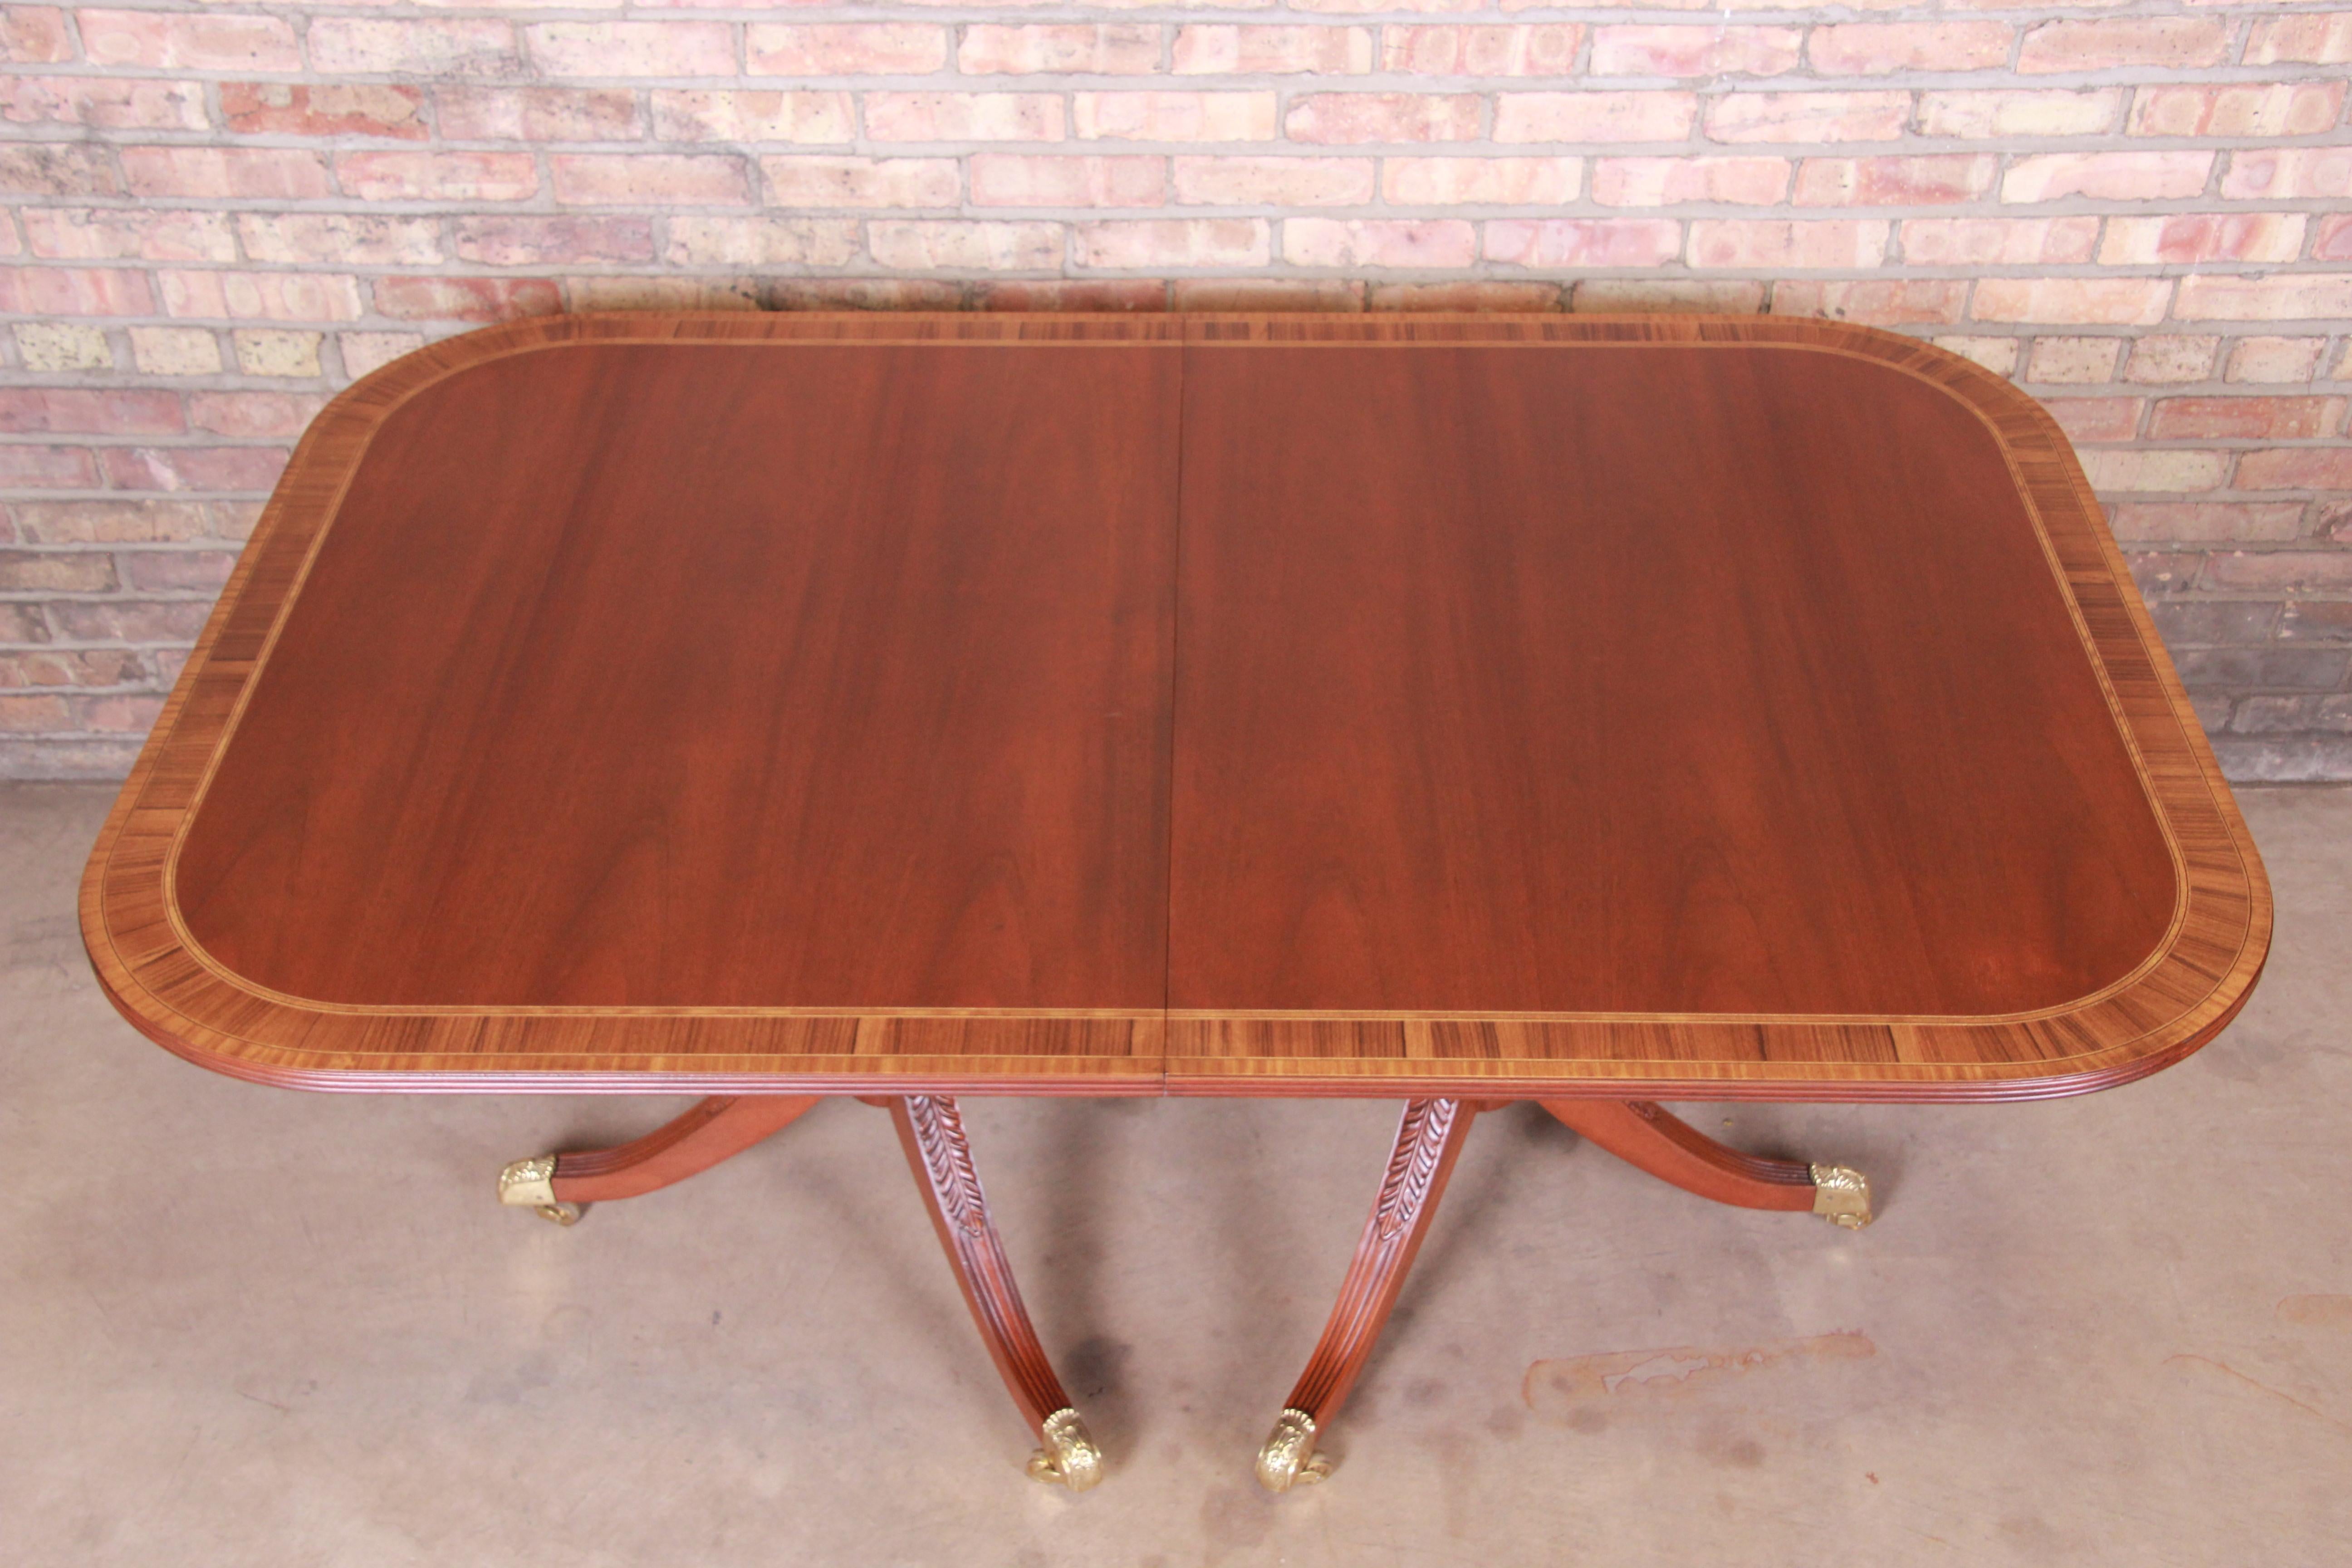 20th Century Councill Georgian Banded Mahogany Double Pedestal Dining Table, Newly Restored